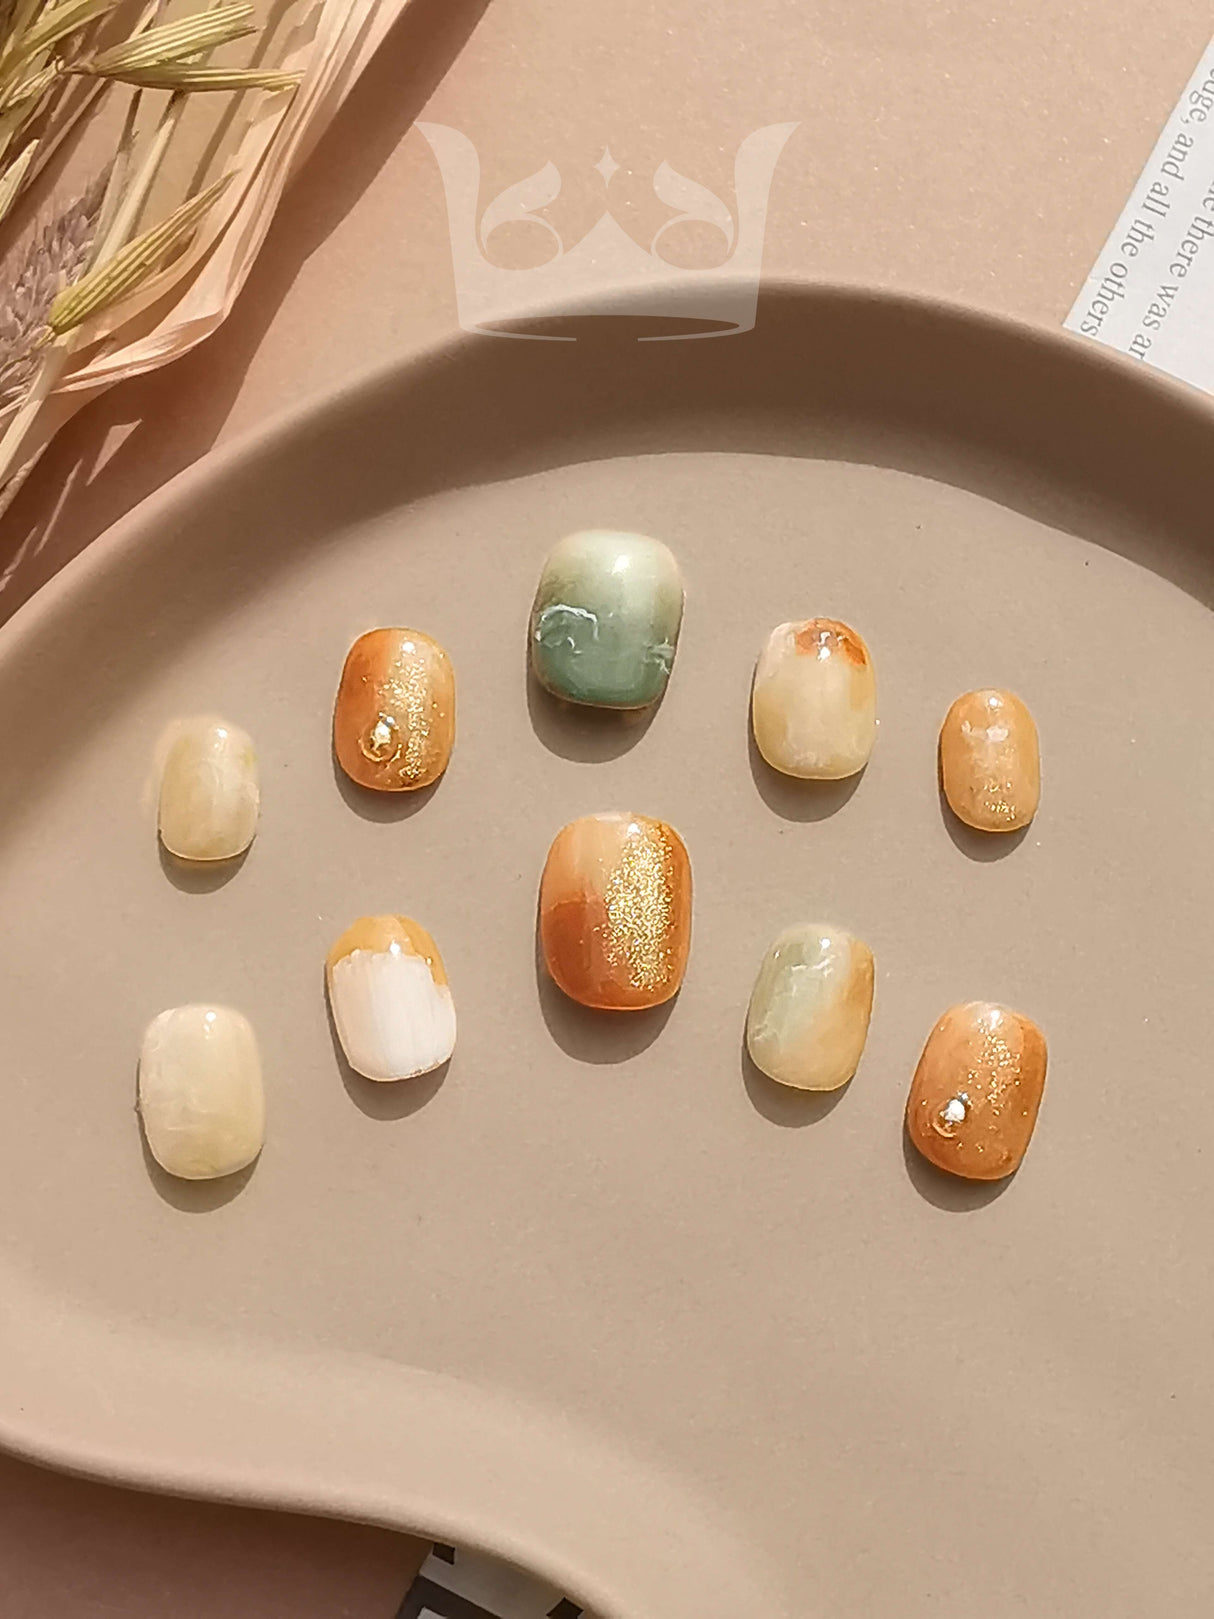 These press-on nails are for those who appreciate a natural and bohemian aesthetic. They feature warm, earthy colors with a marbling effect and gold foil accents. 